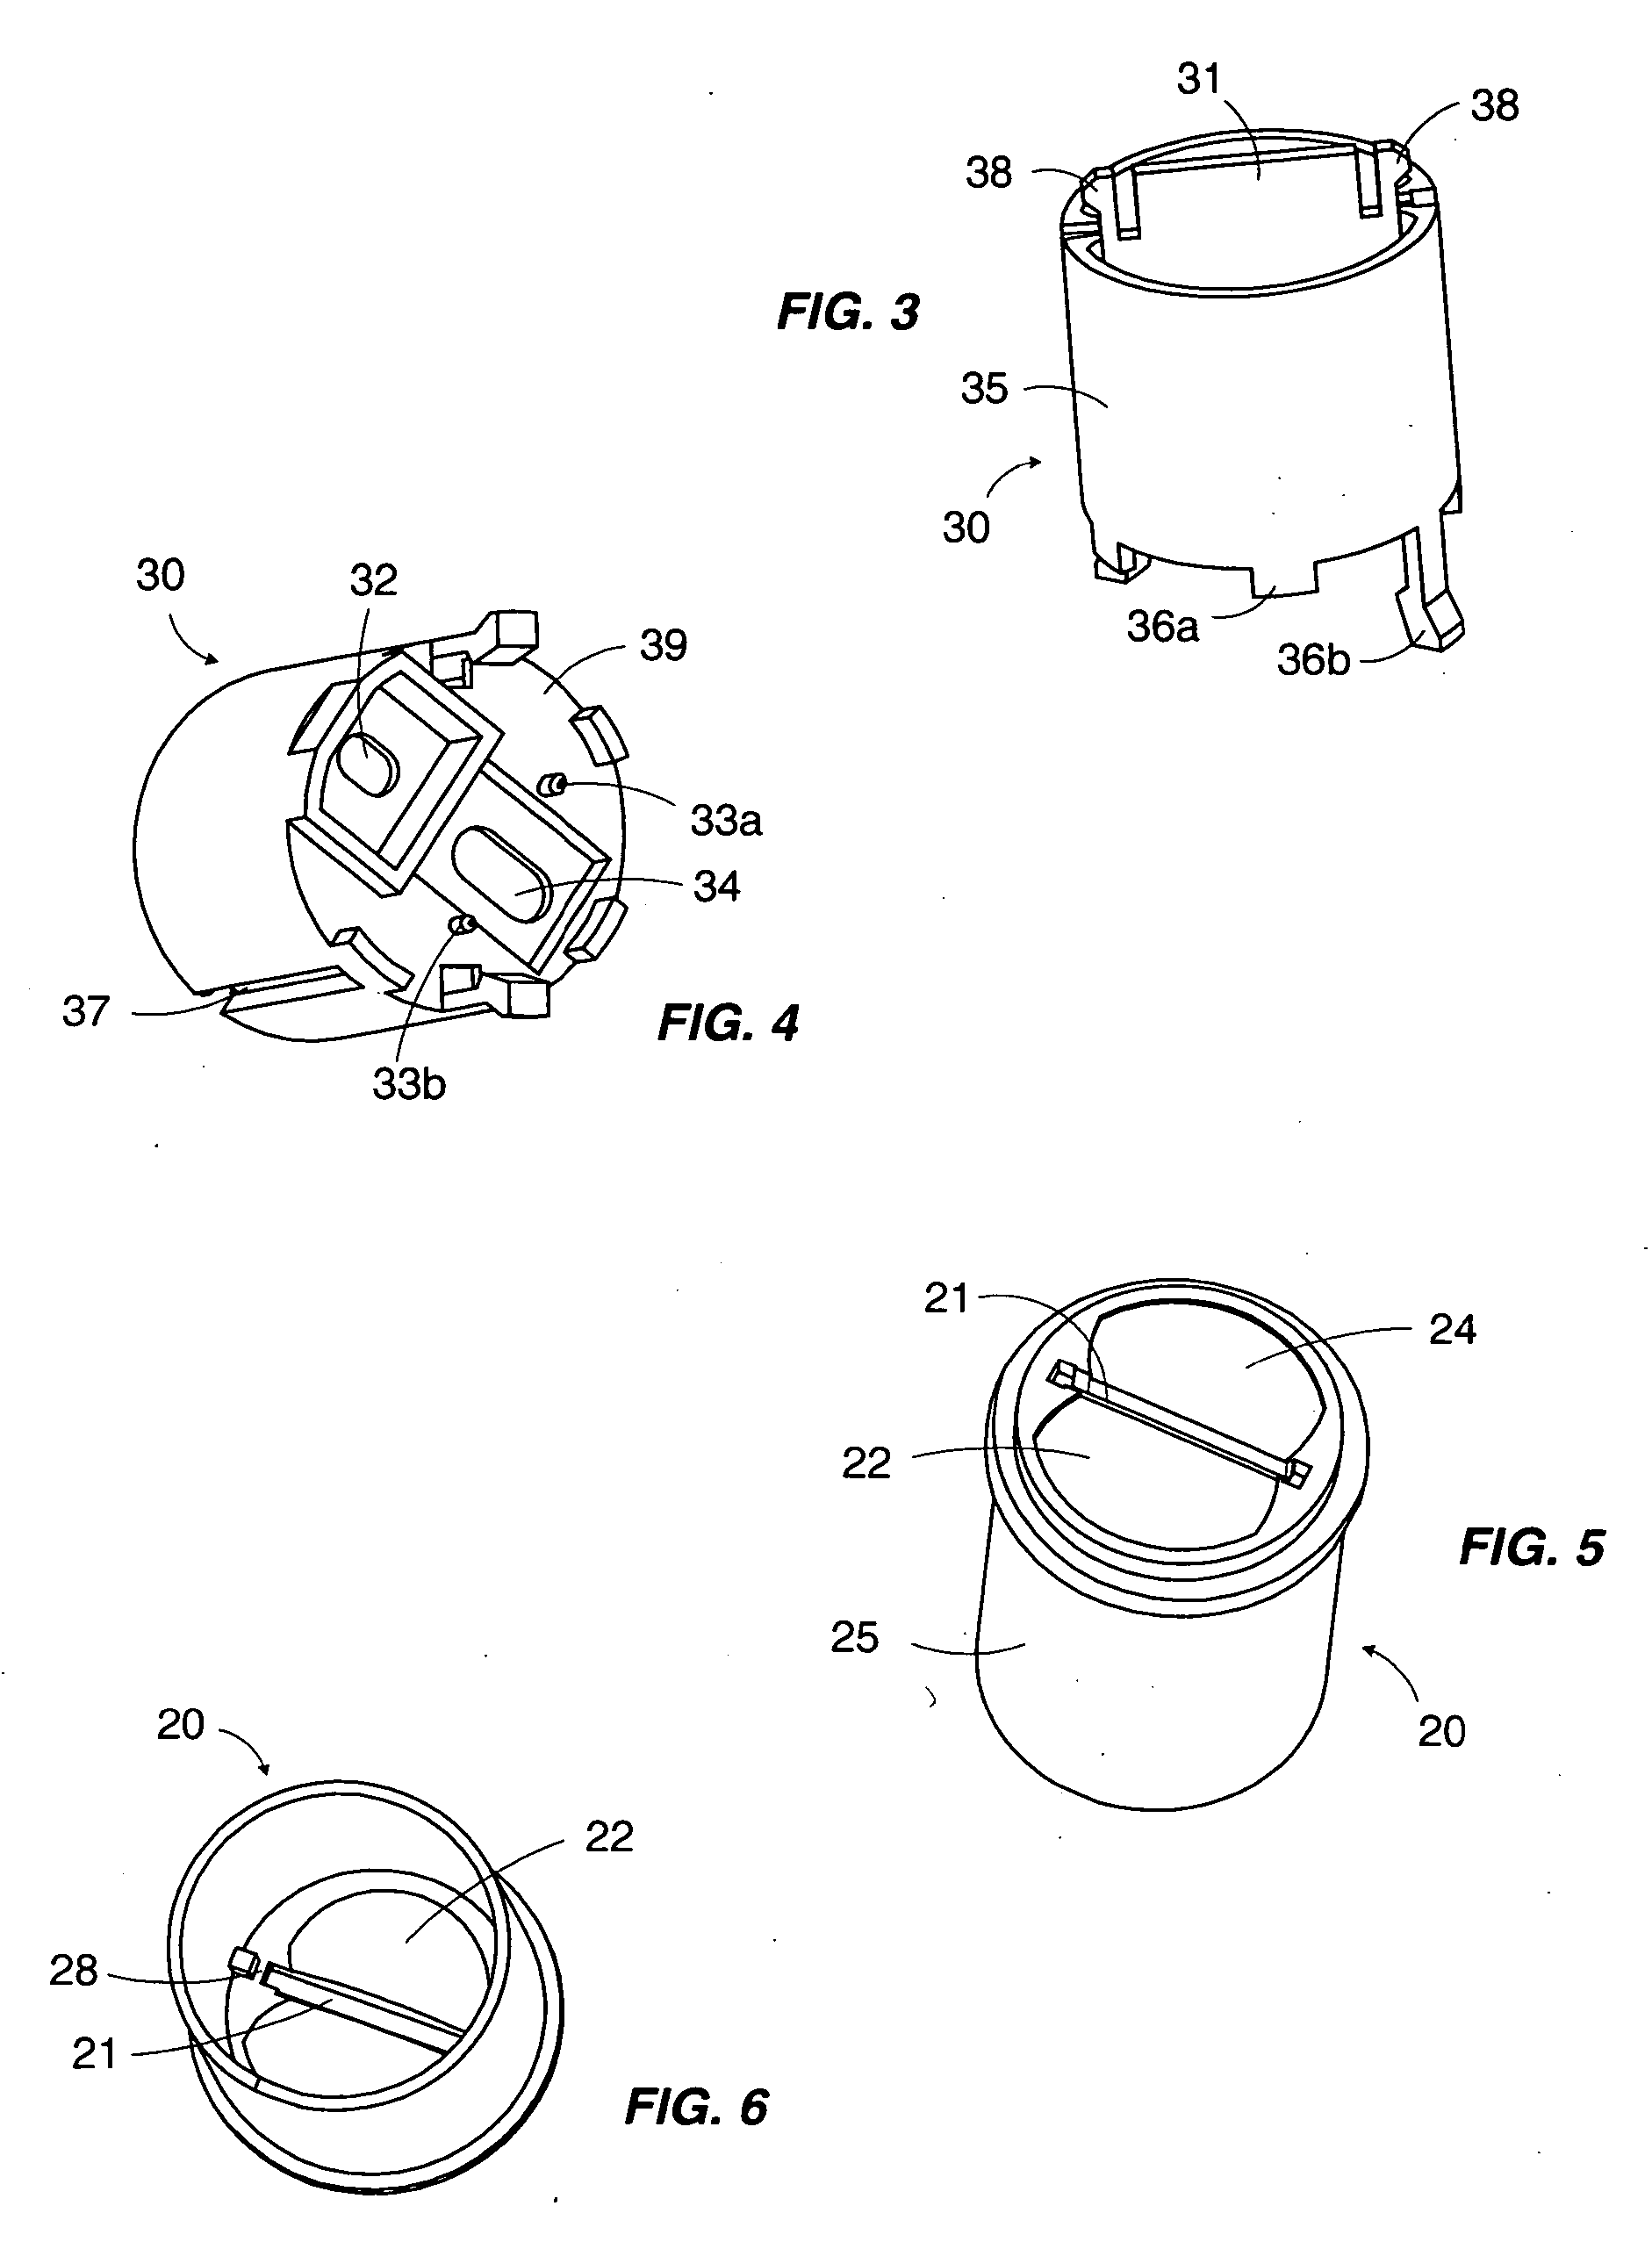 Photoelectric detector